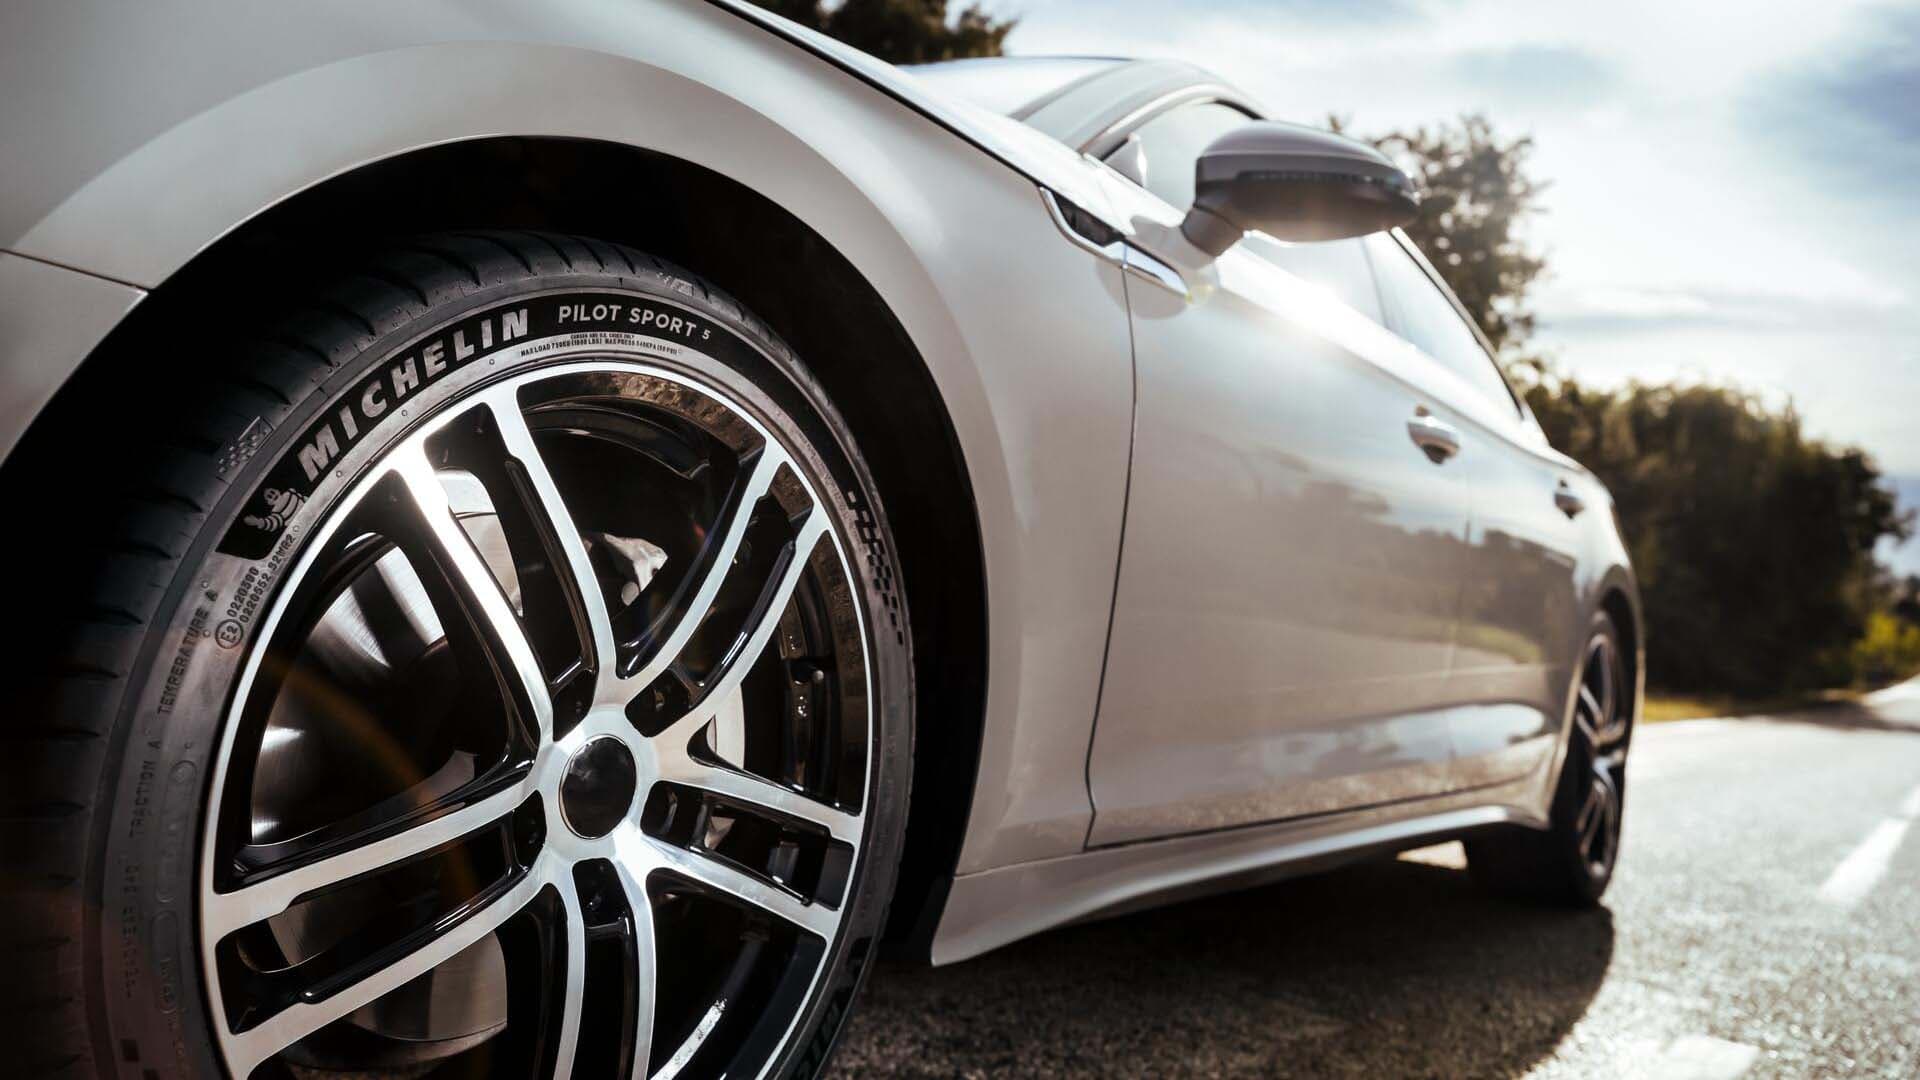 Michelin Pilot Sport 5: One Of The Best Performance Tires May Have Just Gotten Better